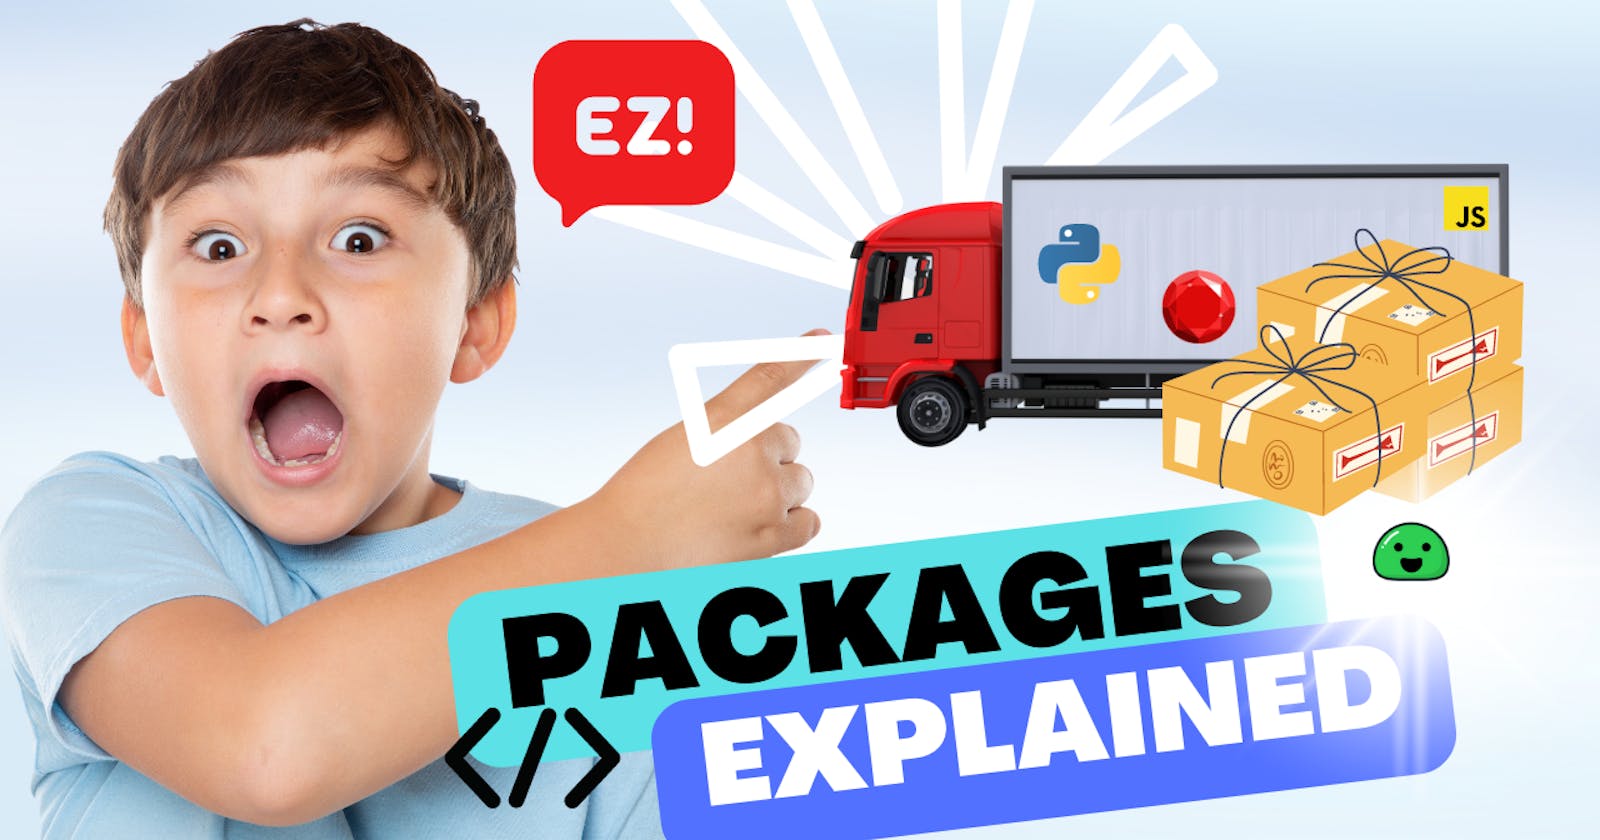 Explaining Packages To A-5Year-Old